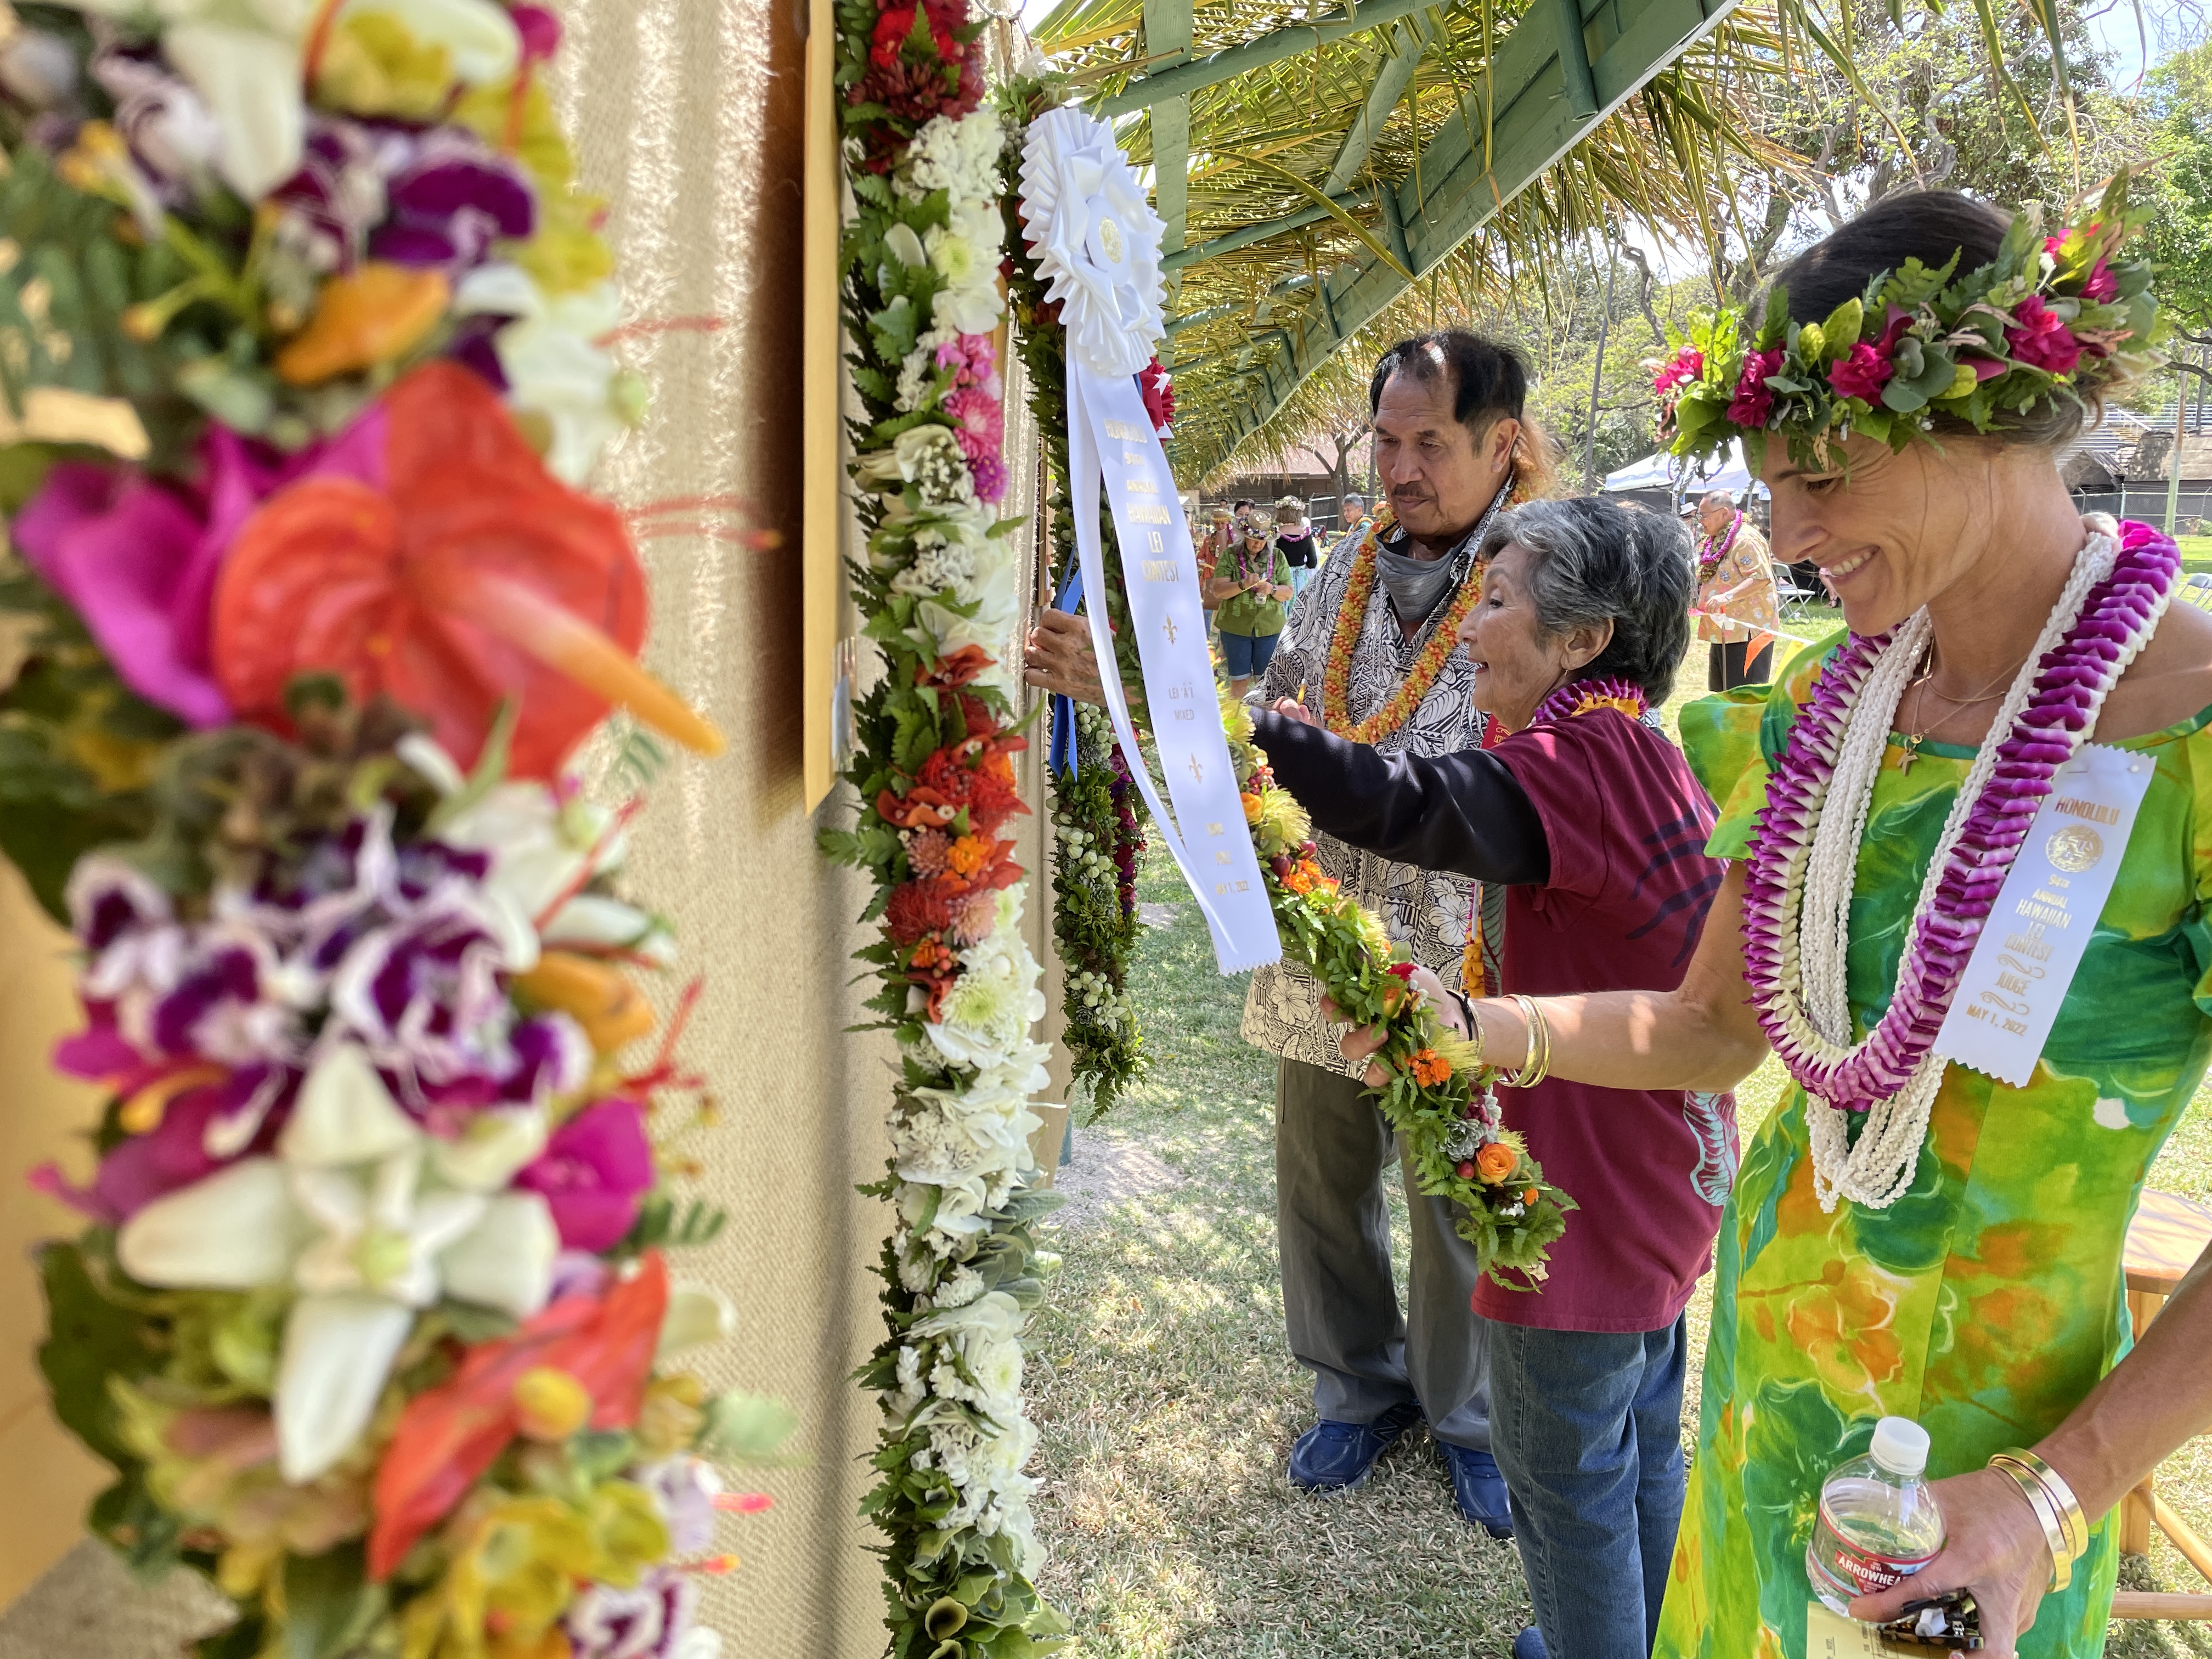 Culture, pageantry on display in Waikiki as Lei Day celebration returns